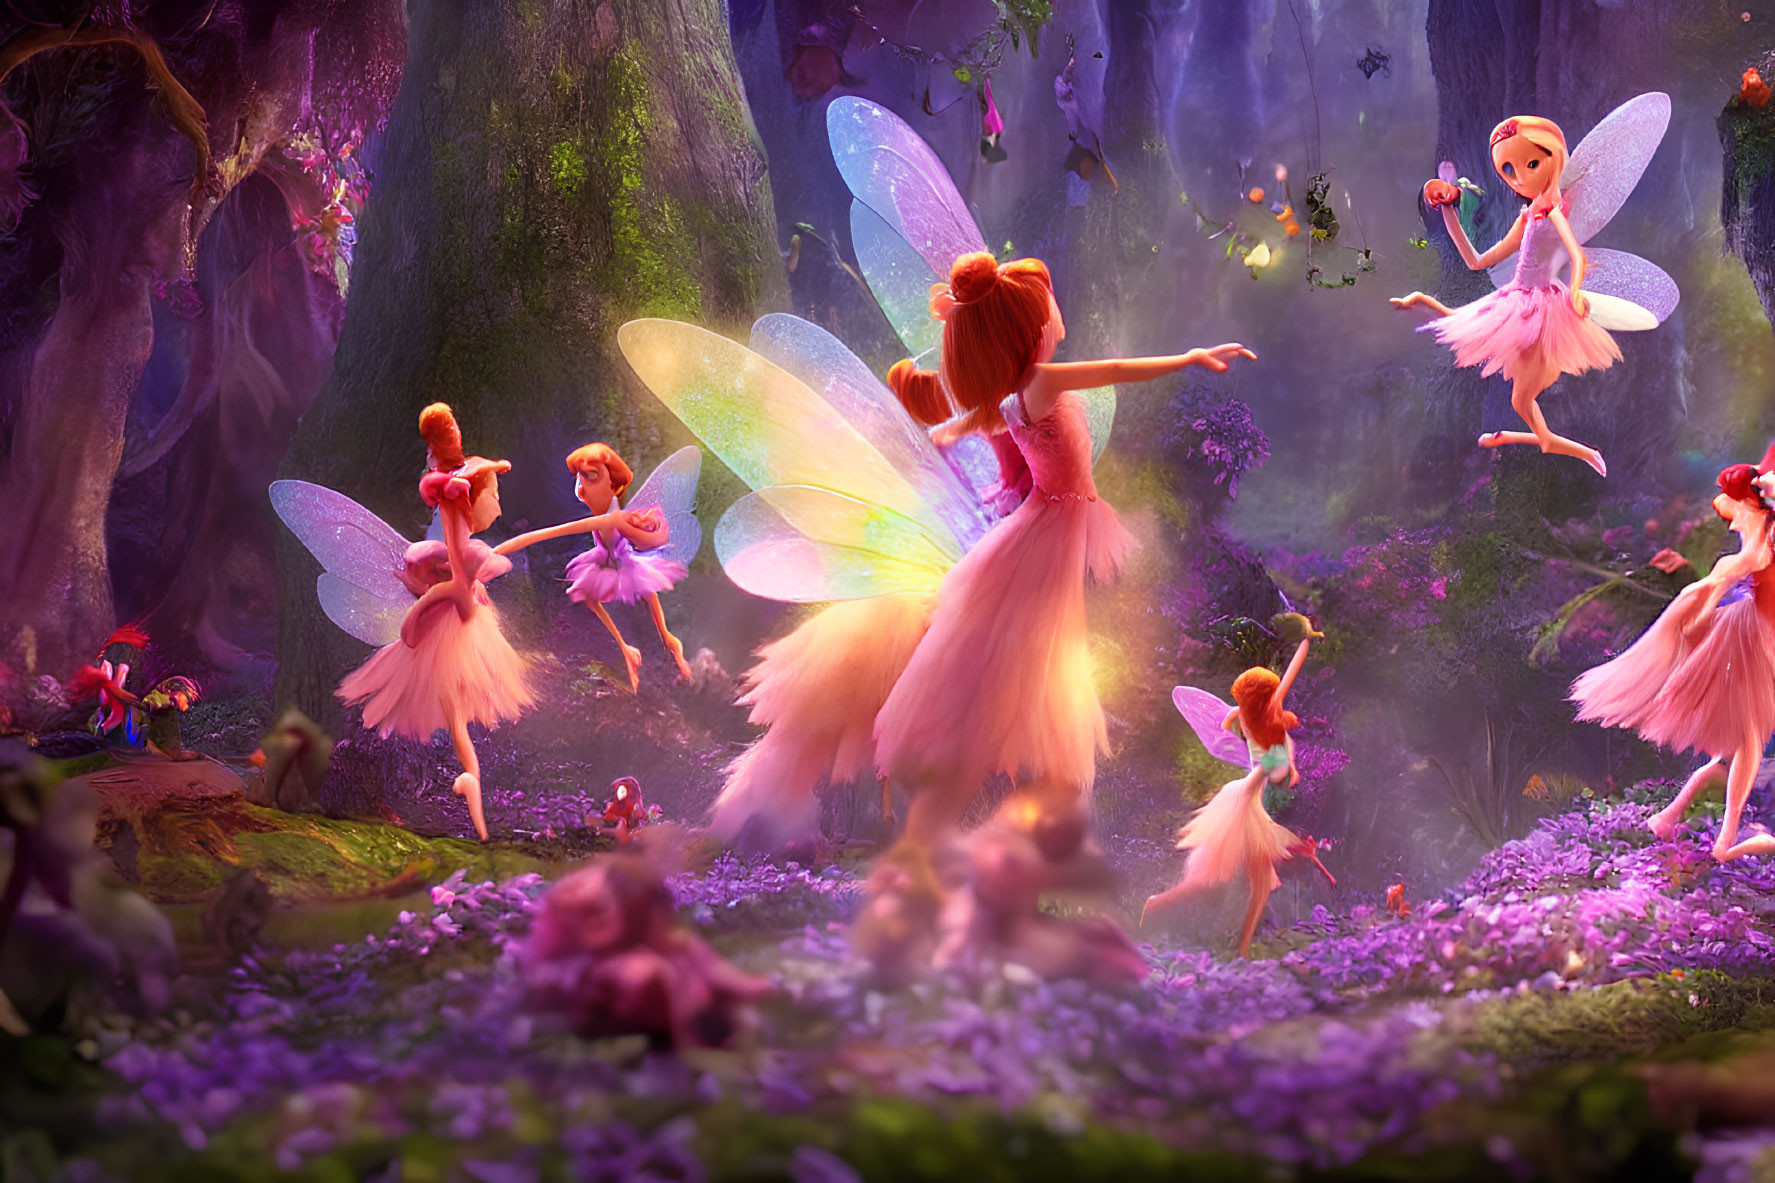 Iridescent-winged fairies in vibrant enchanted forest playing with tiny creatures